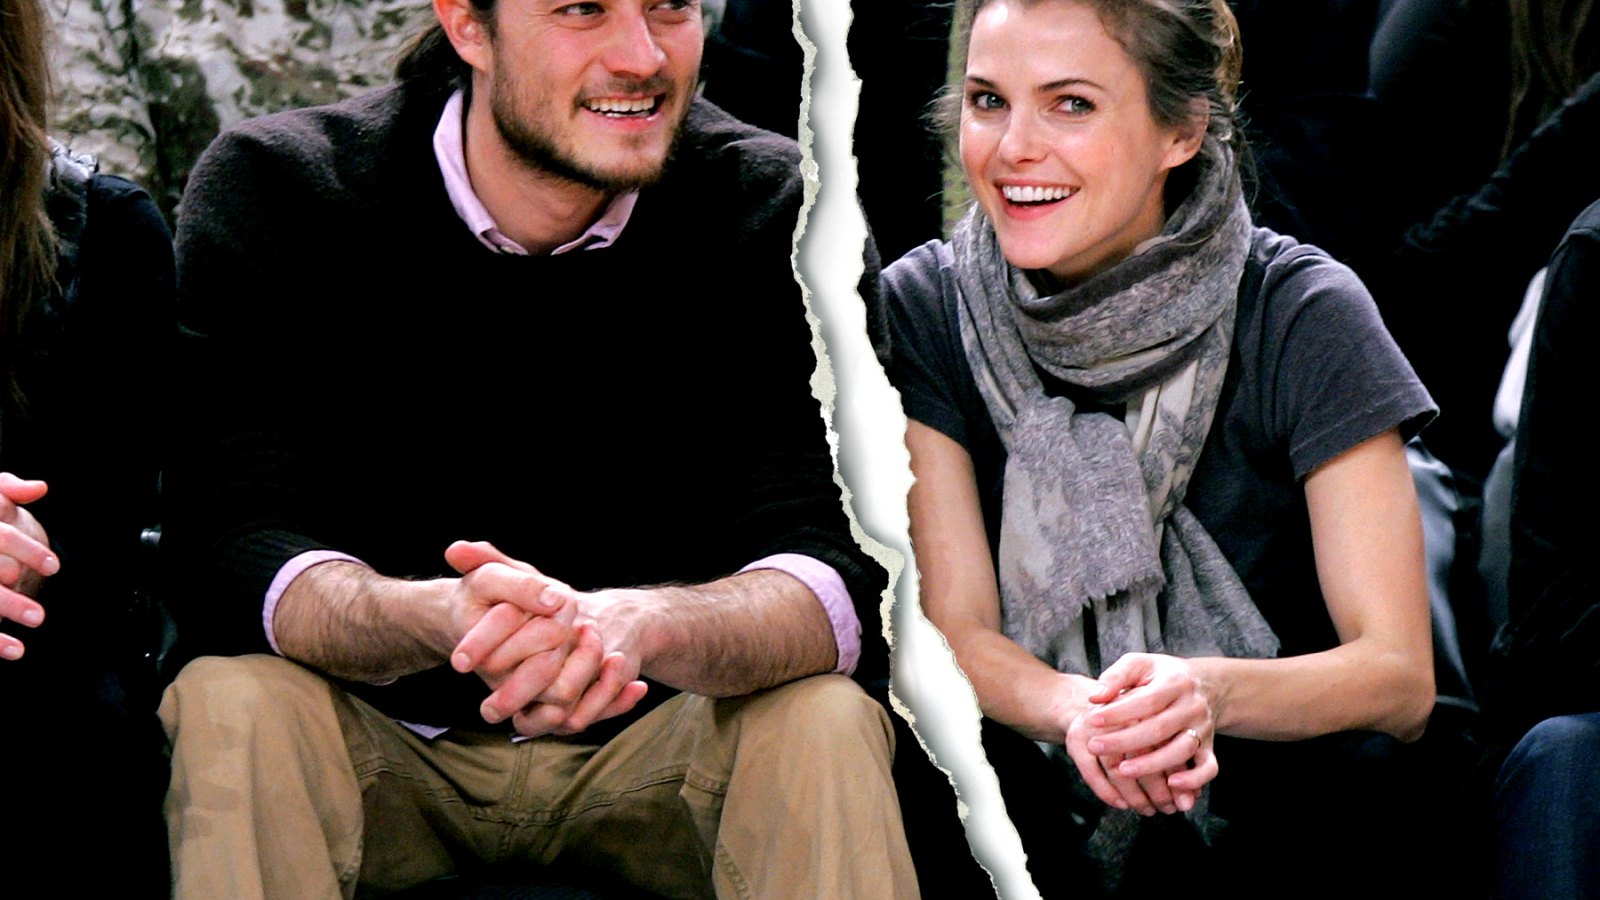 Keri Russell and Shane Dreary at Madison Square Garden on Dec 10, 2007